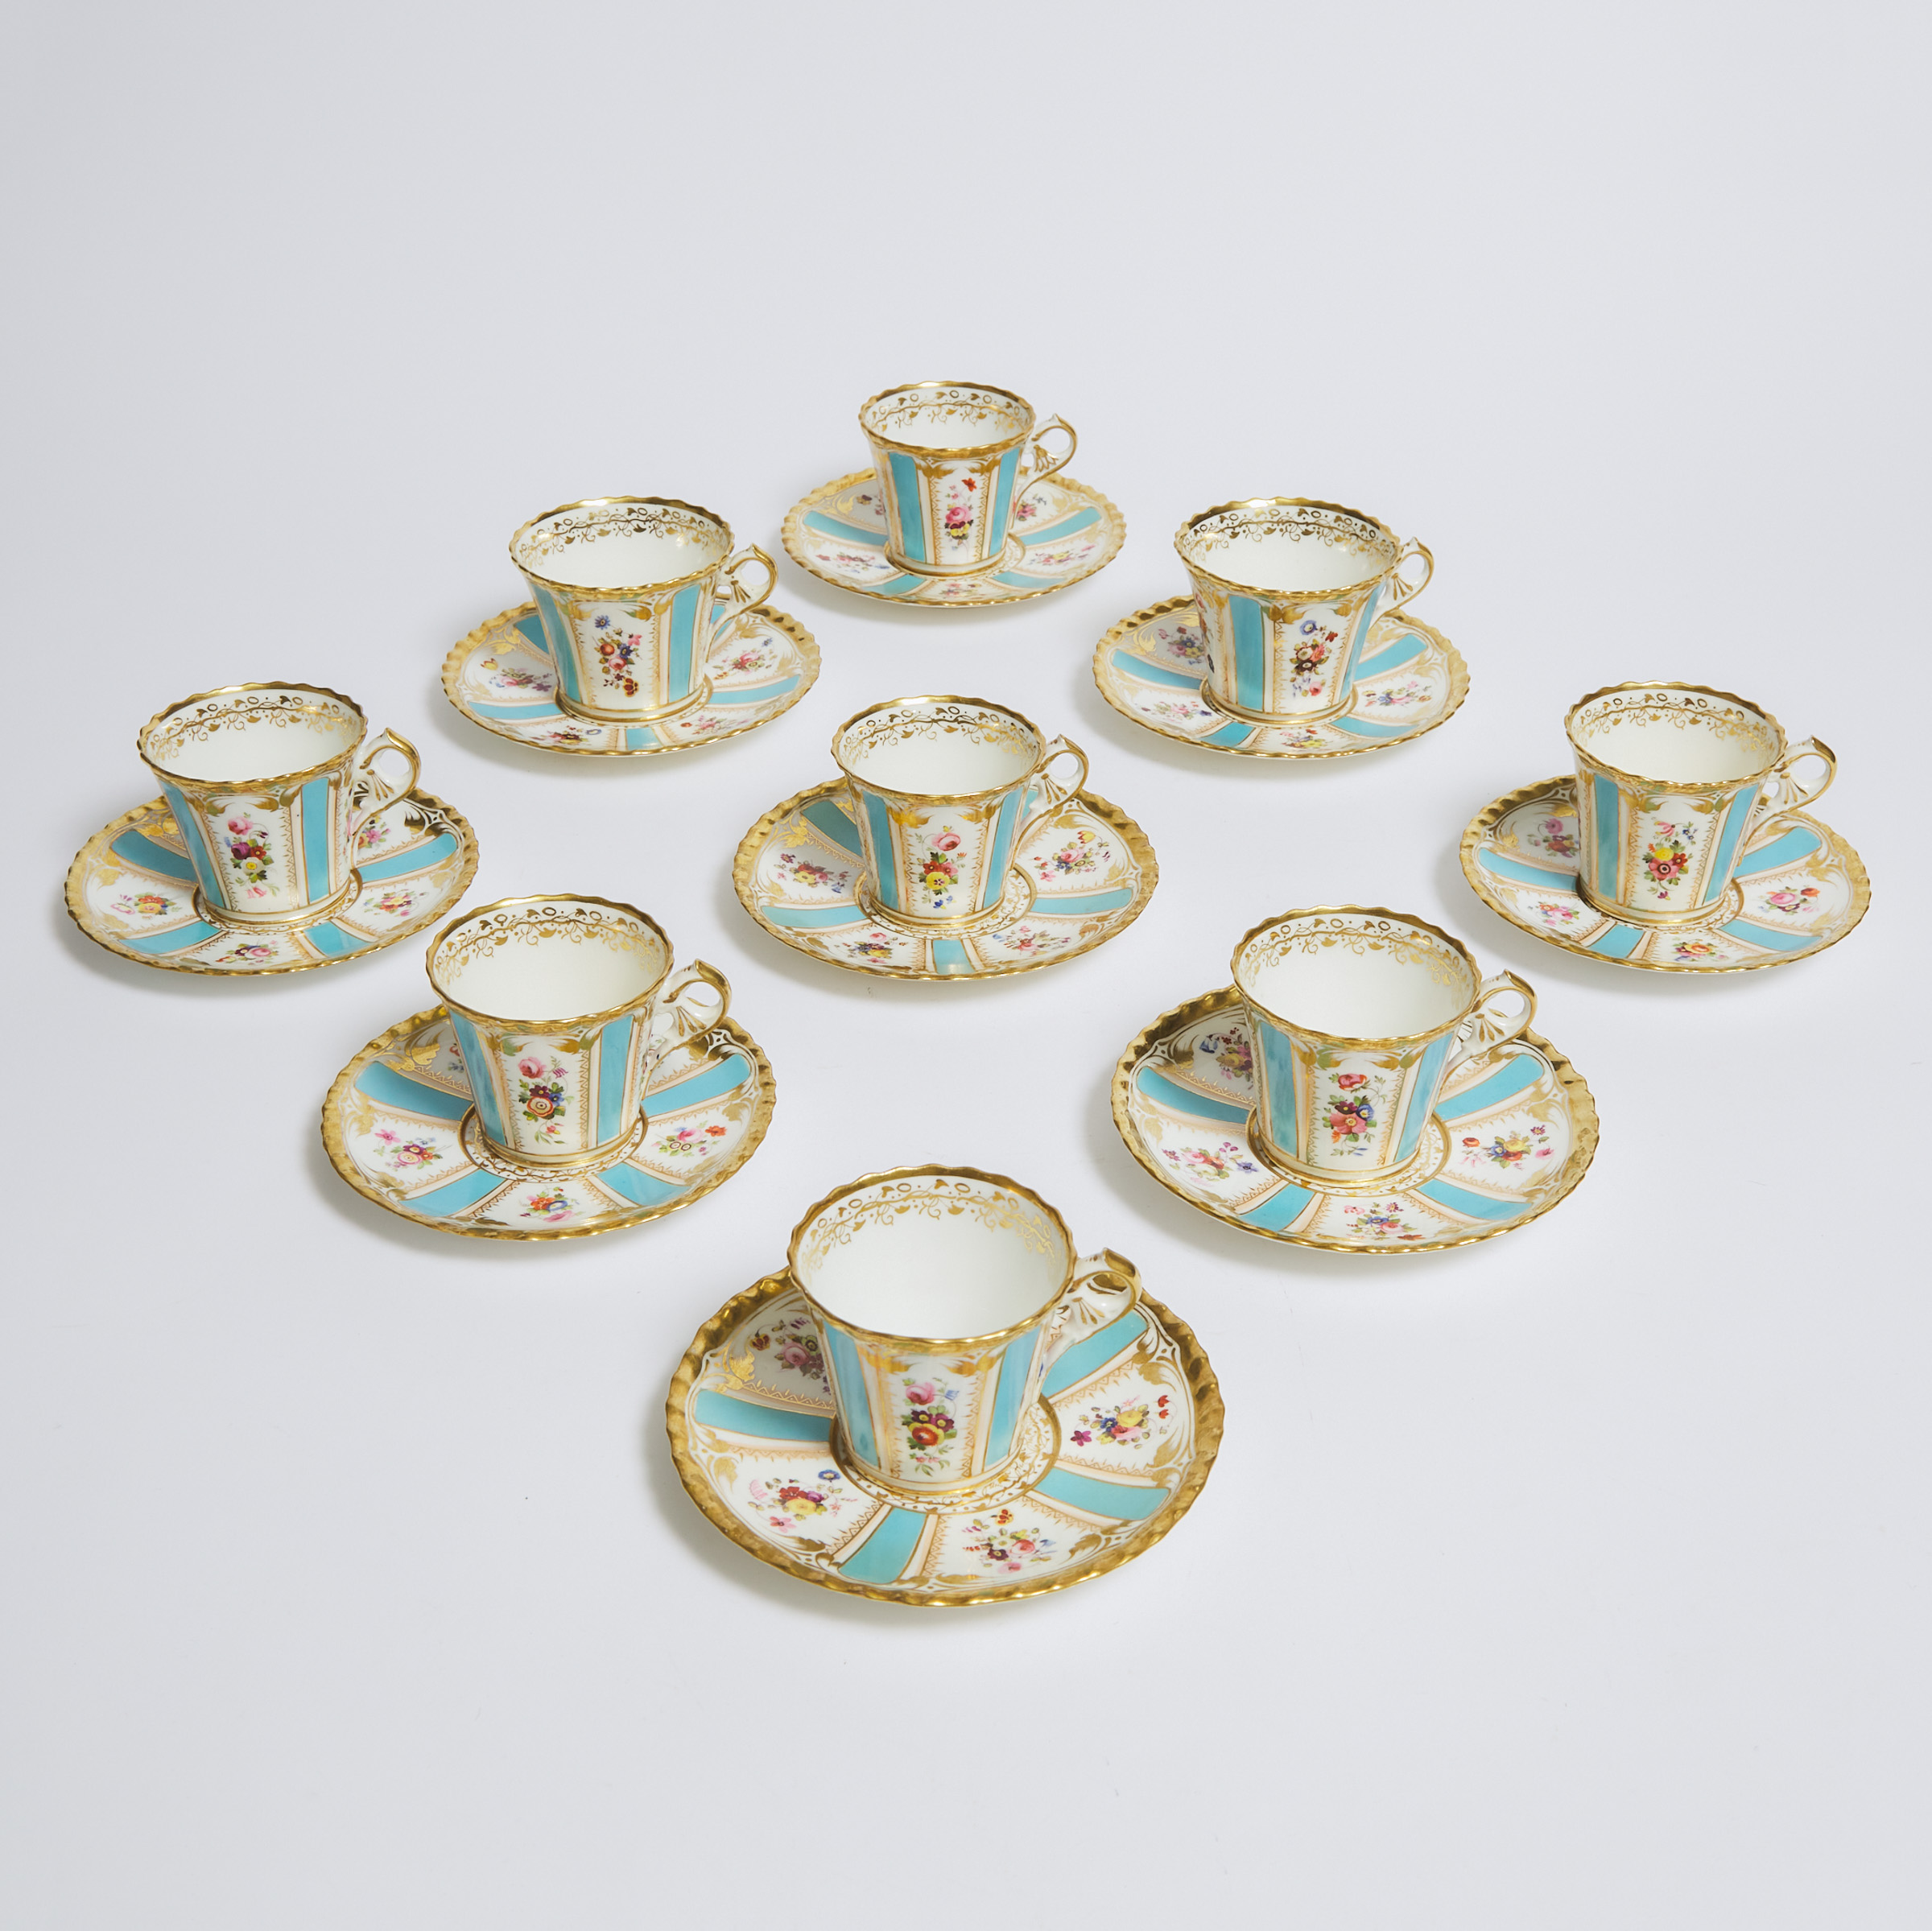 Nine English Porcelain Floral Paneled Blue and Gilt Cups and Saucers, 19th century